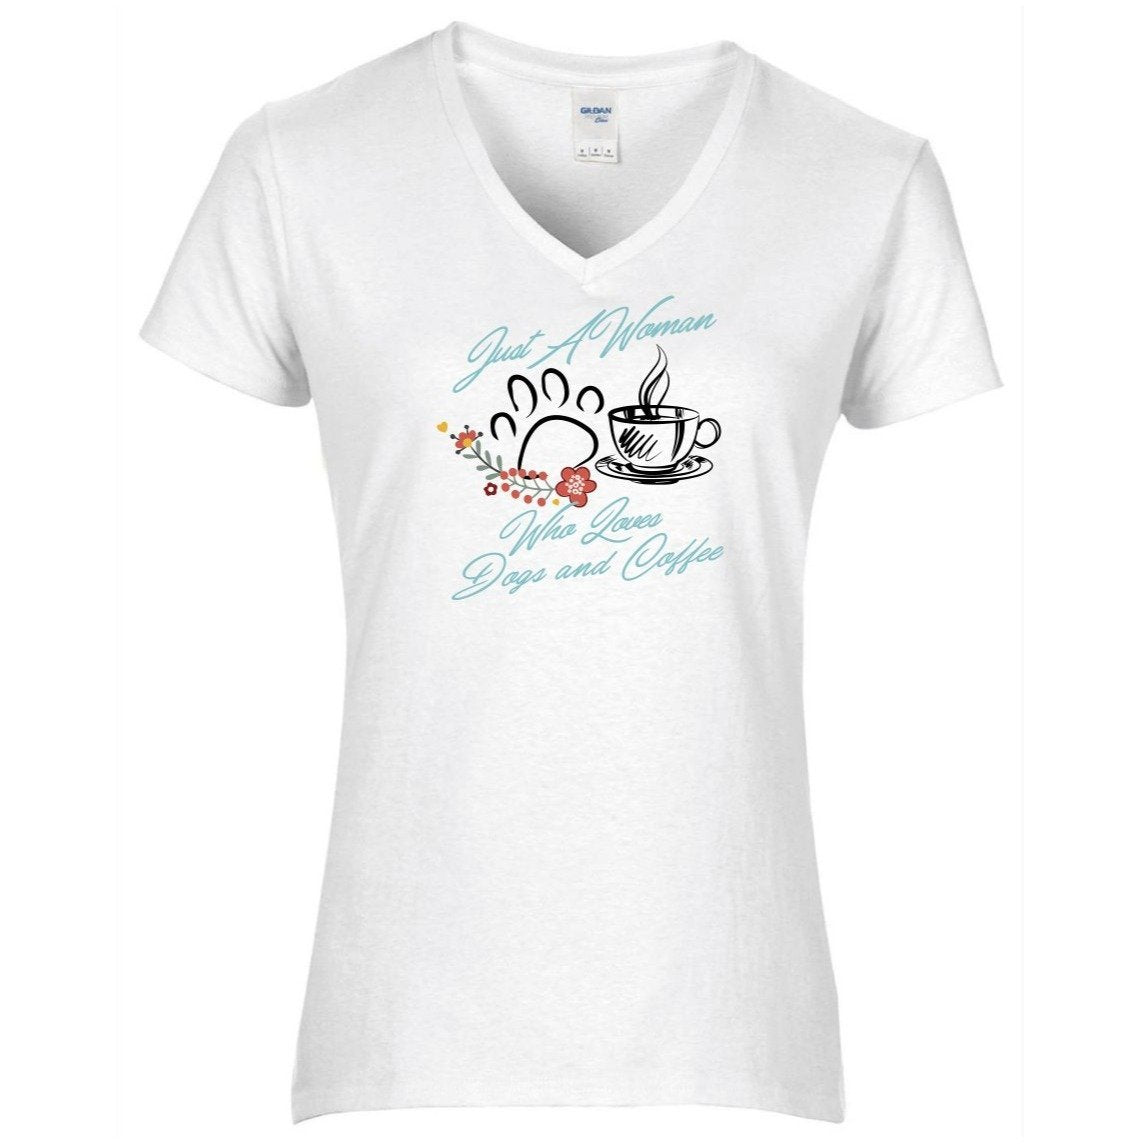 Dogs and Coffee Women's T-shirt - Pooch-